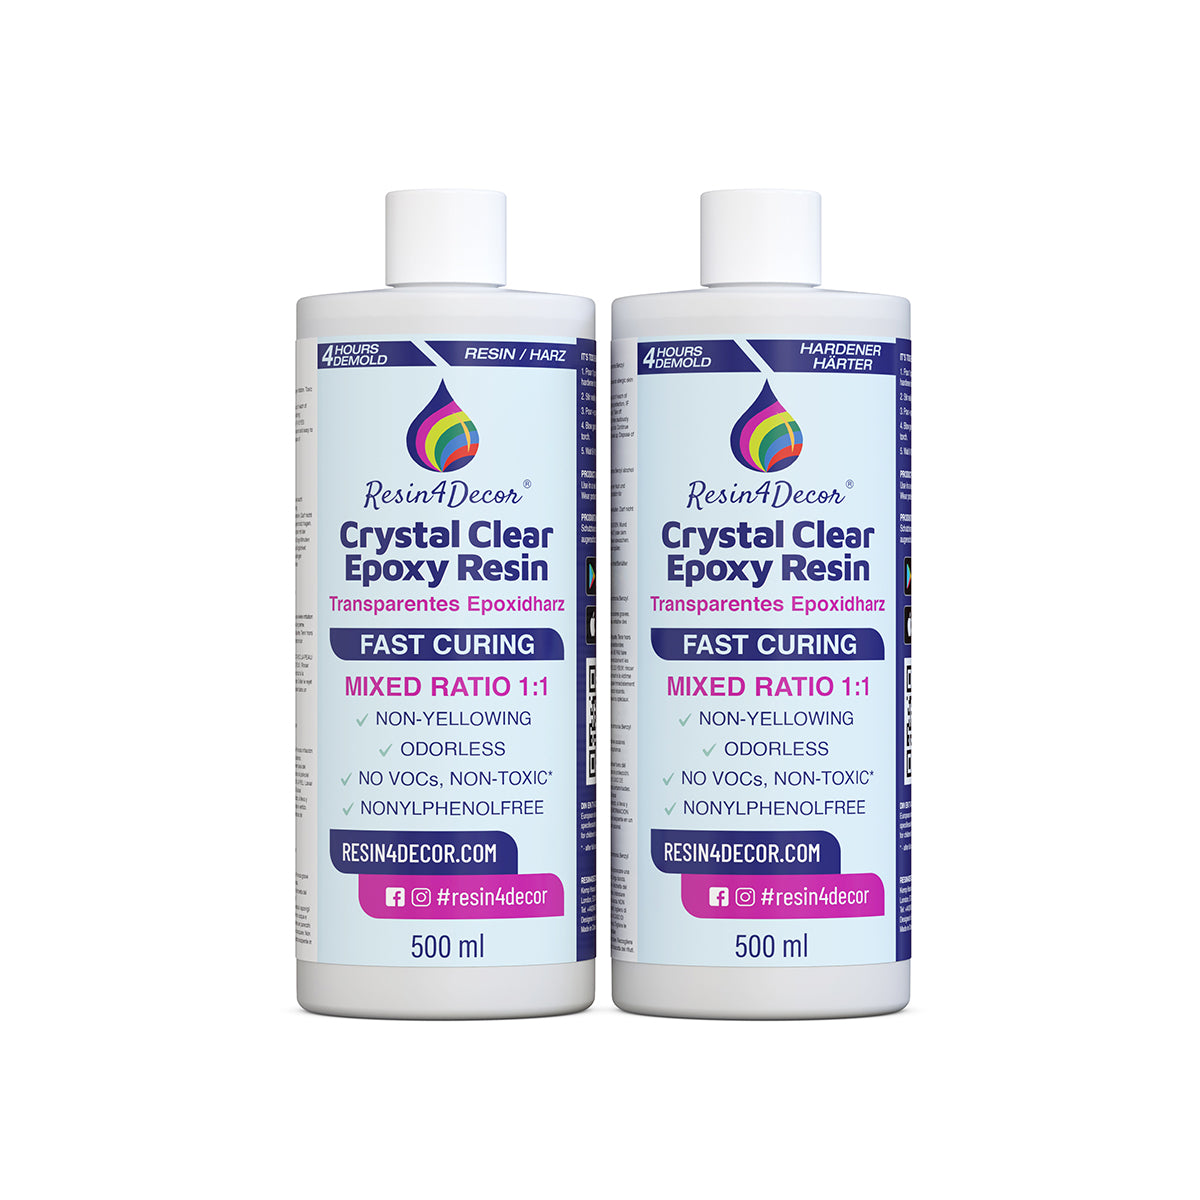 EPOXY RESIN ULTRA CLEAR PRO, FAST CURING 2:1 Art, River, Free Freight  $36.95 - PicClick AU